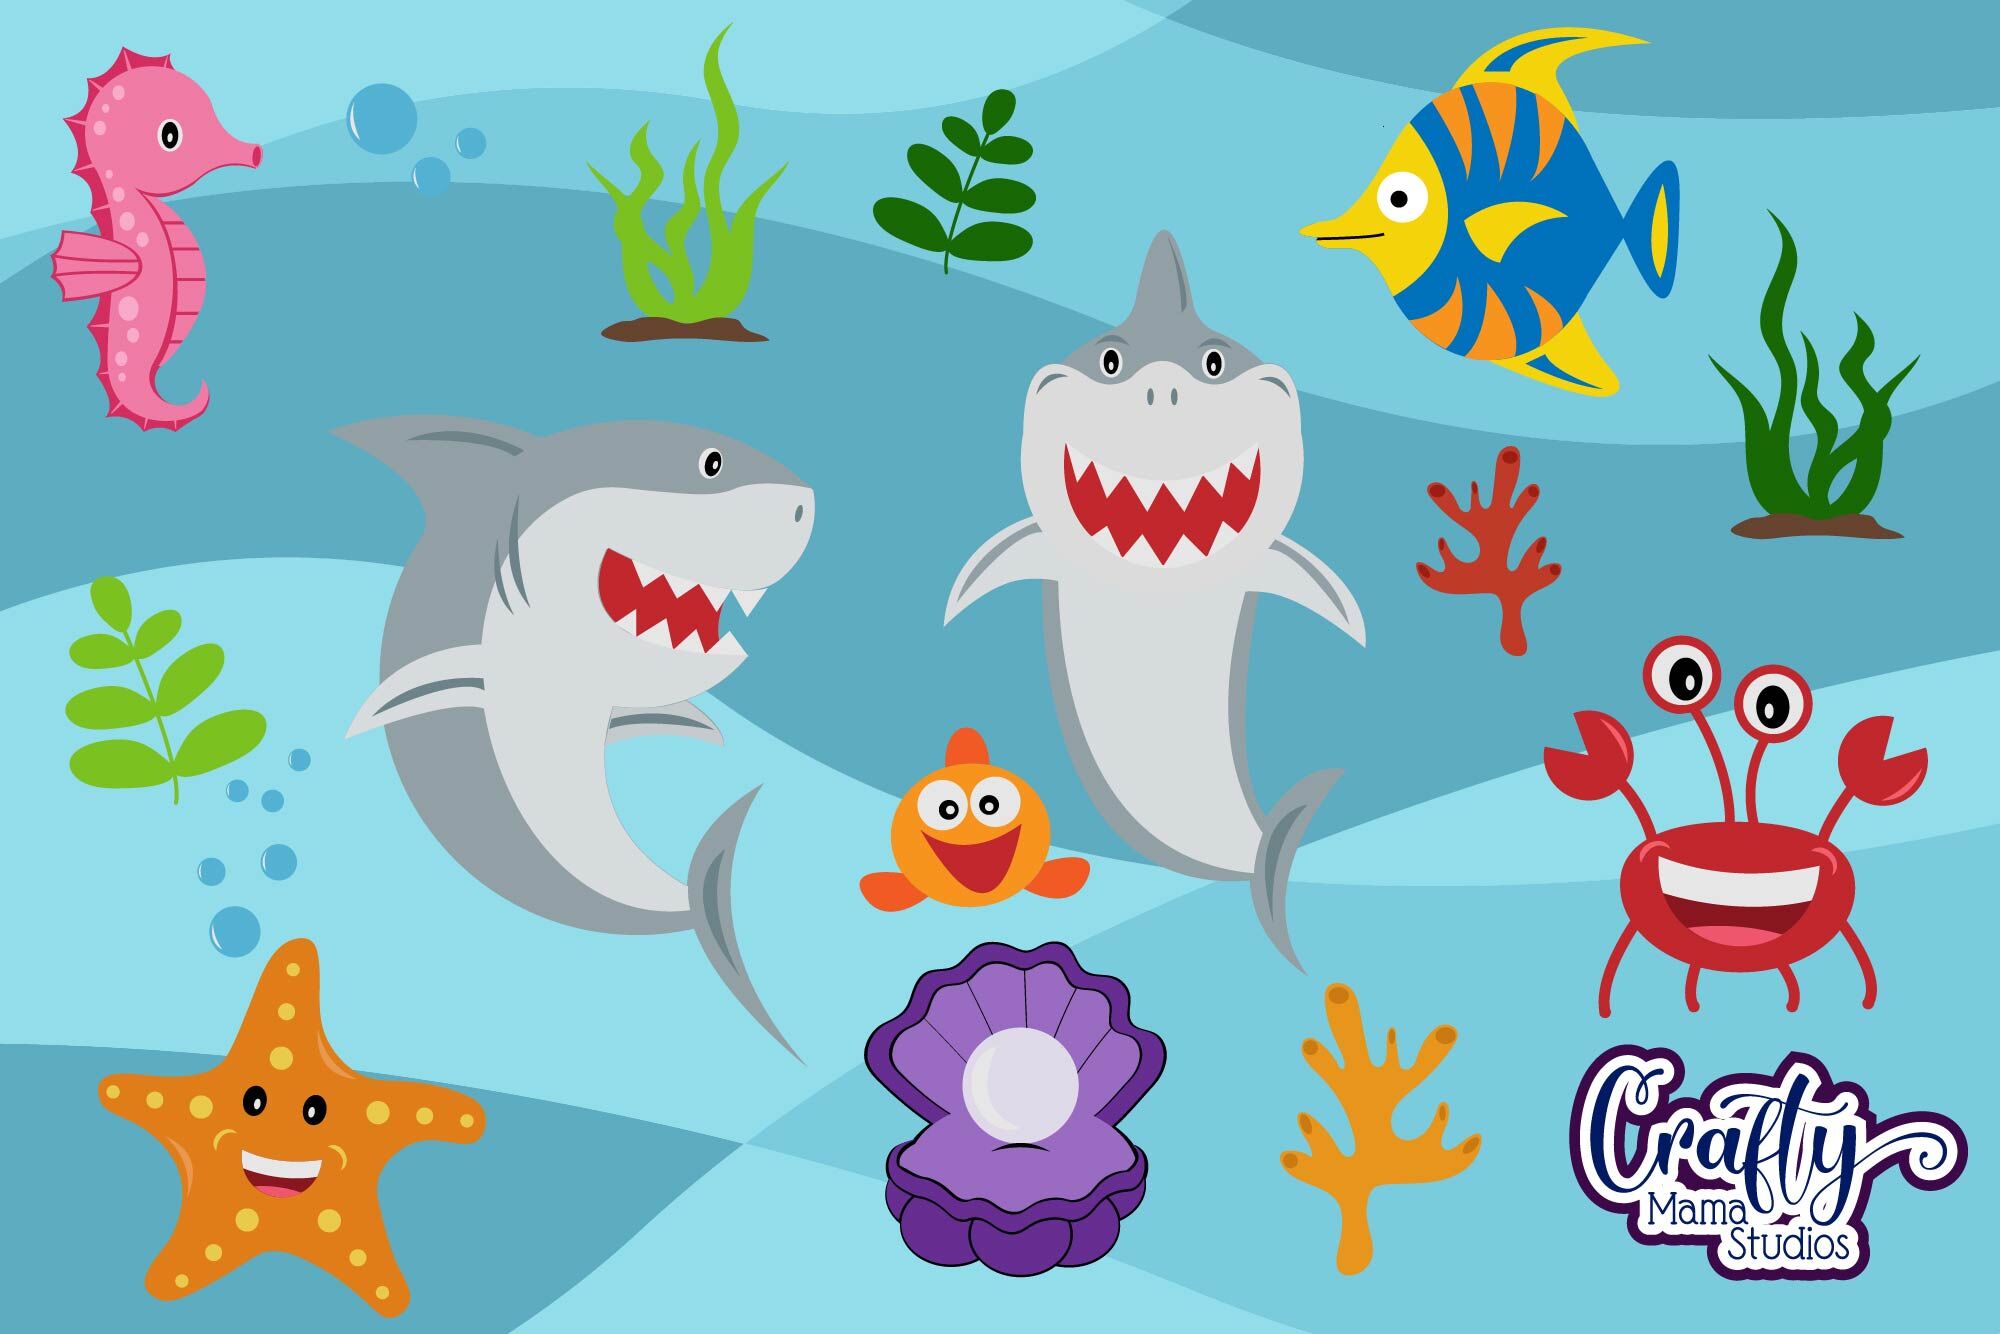 Download Baby Shark Svg Baby Shark Bundle By Crafty Mama Studios Thehungryjpeg Com SVG, PNG, EPS, DXF File